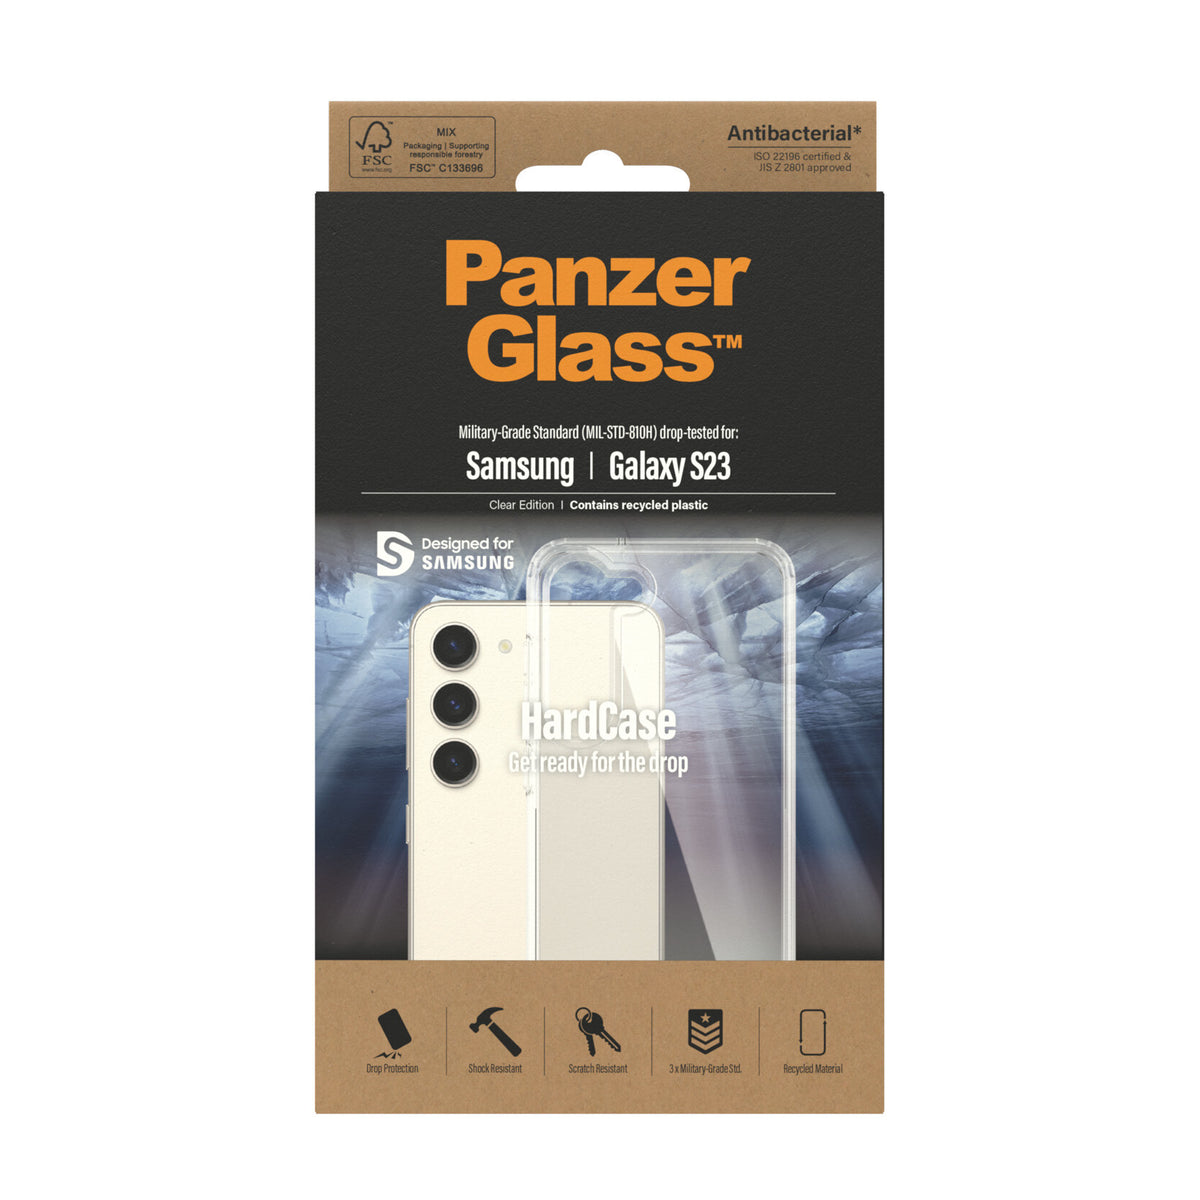 PanzerGlass ® HardCase for Galaxy S23 in Transparent